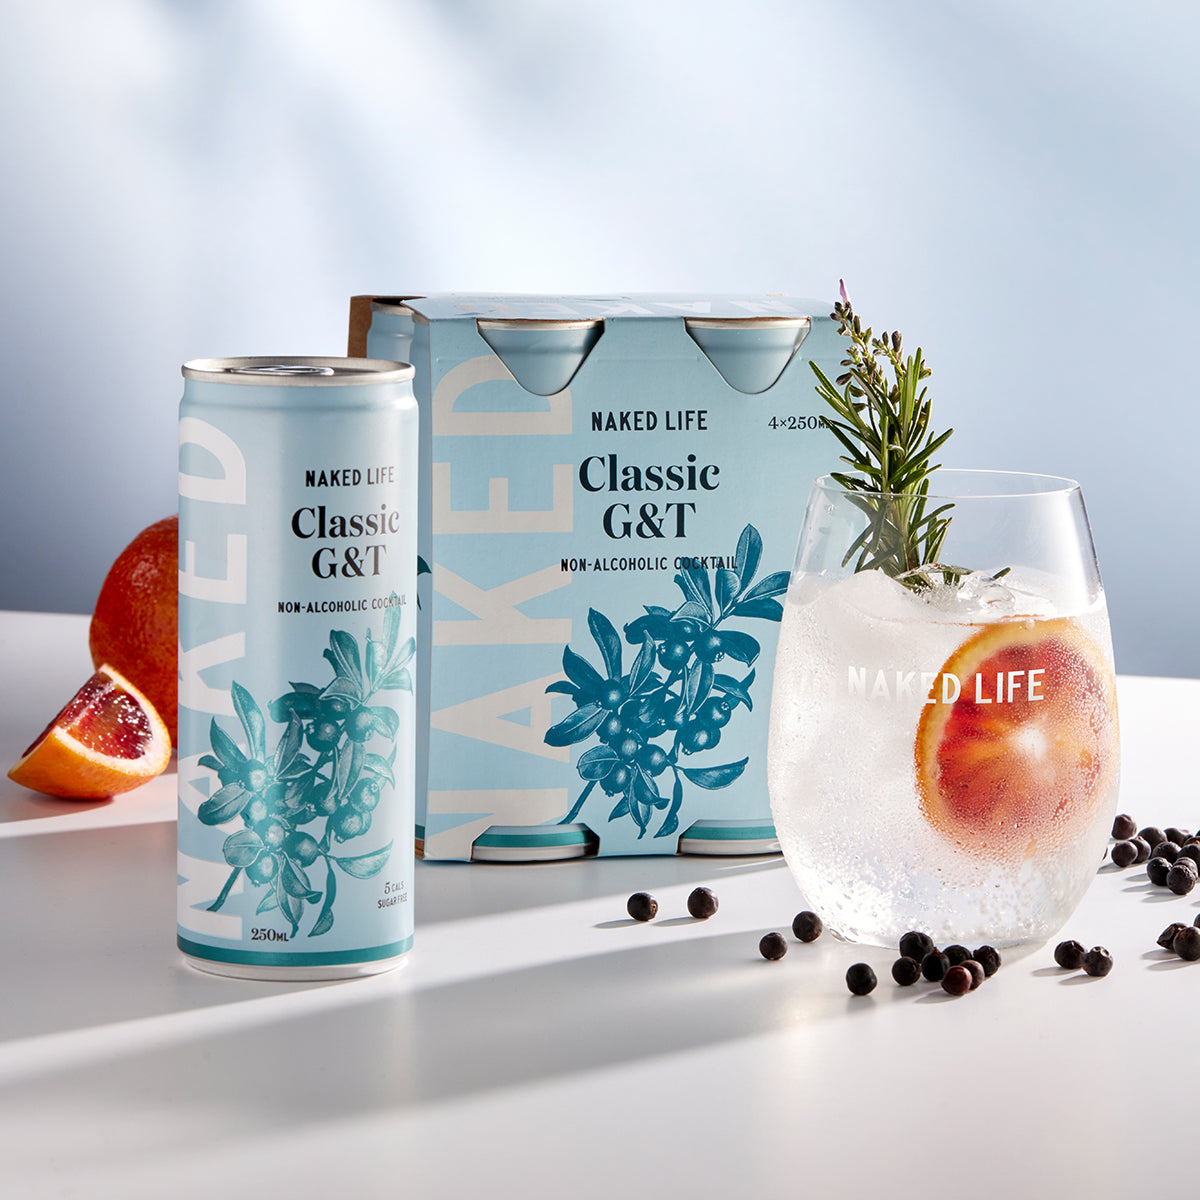 Naked Life Non-Alcoholic Cocktail Classic G&T - 4 Pack x 250ml Cans